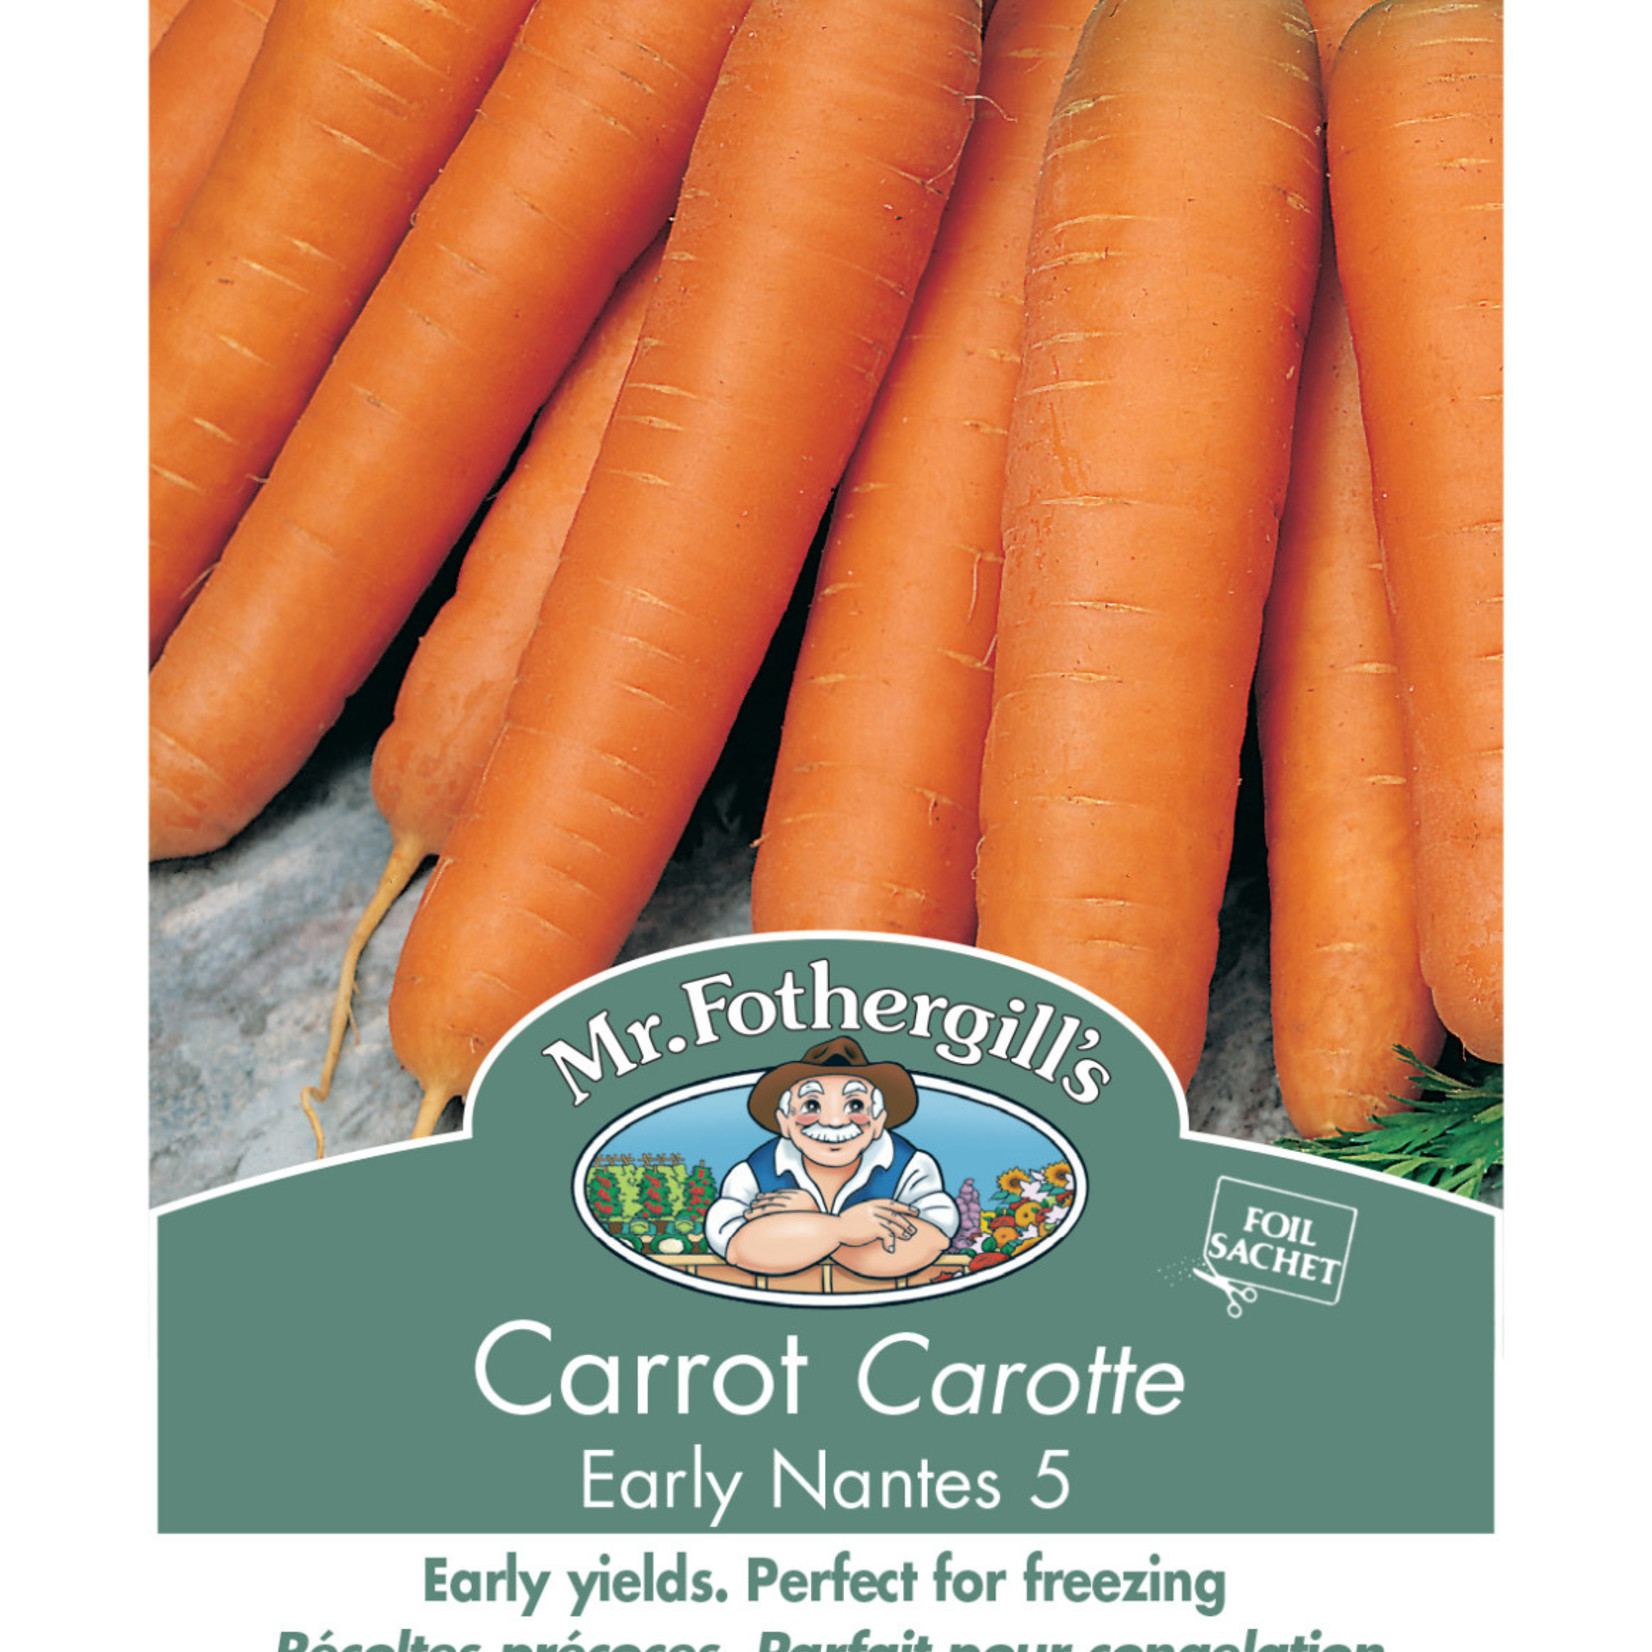 Mr. Fothergill's CARROT Early Nantes 5 Seeds